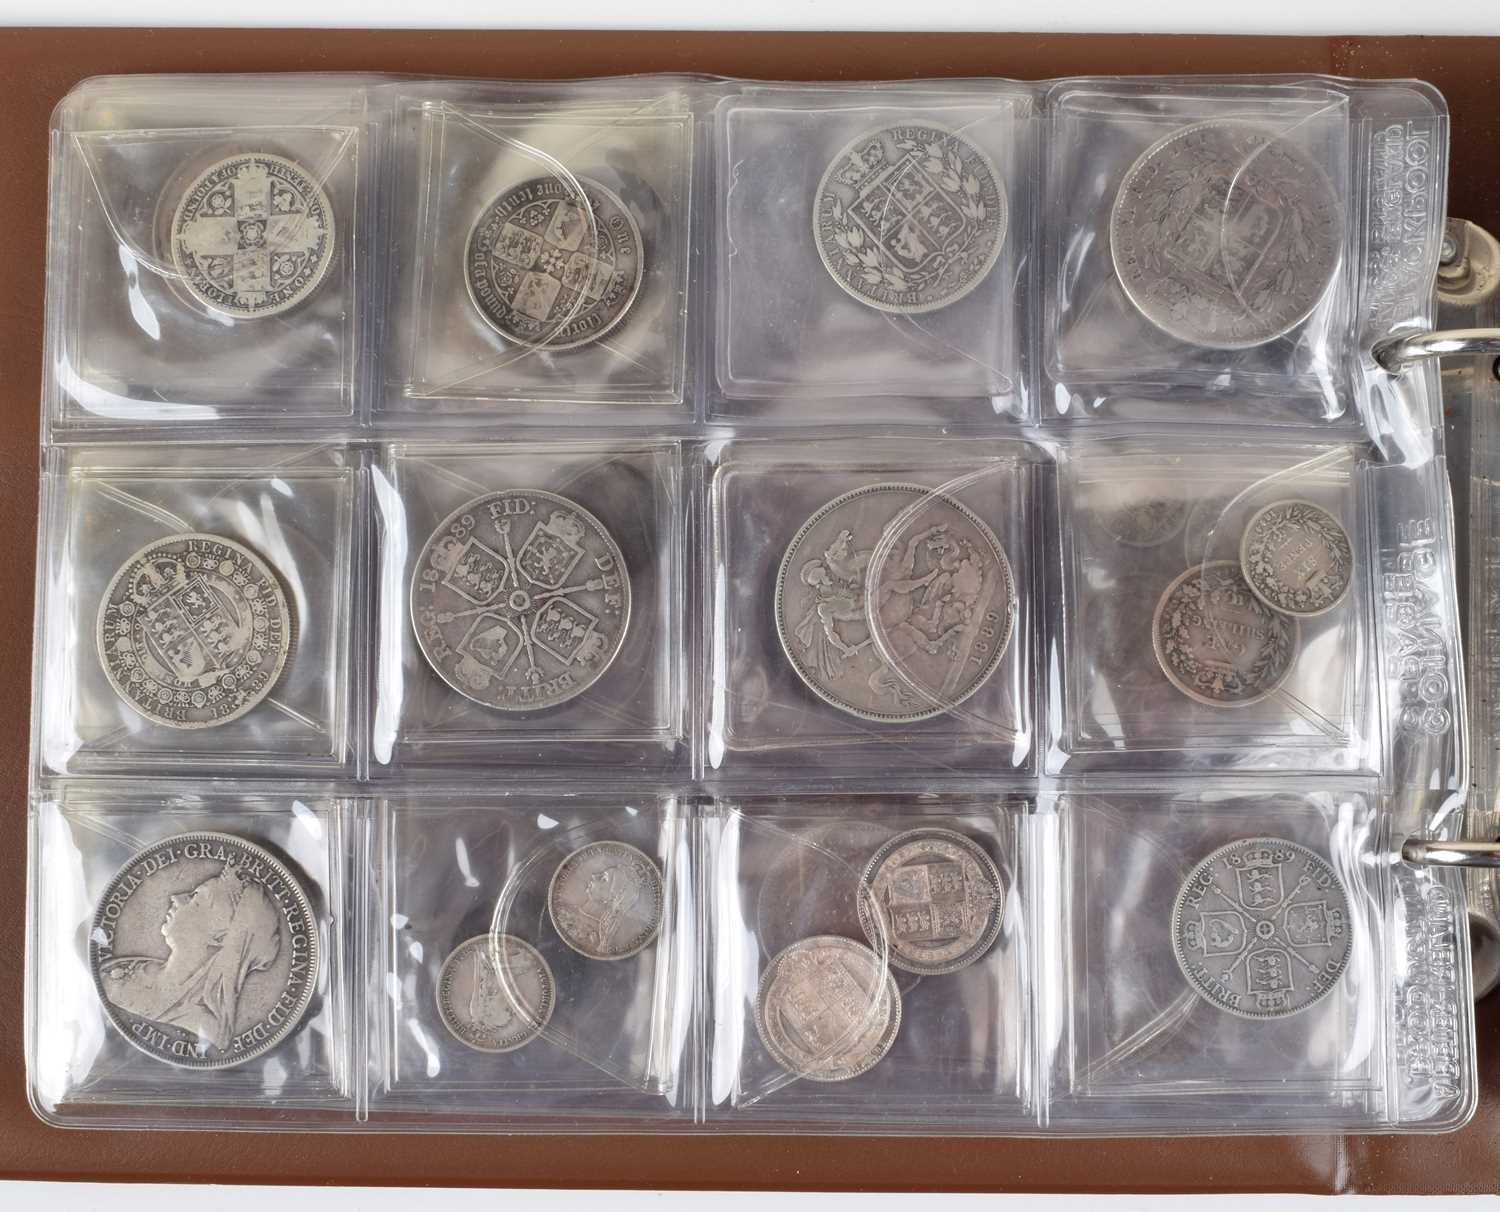 One album of historical British coinage dating from William and Mary through to George V. - Image 14 of 22